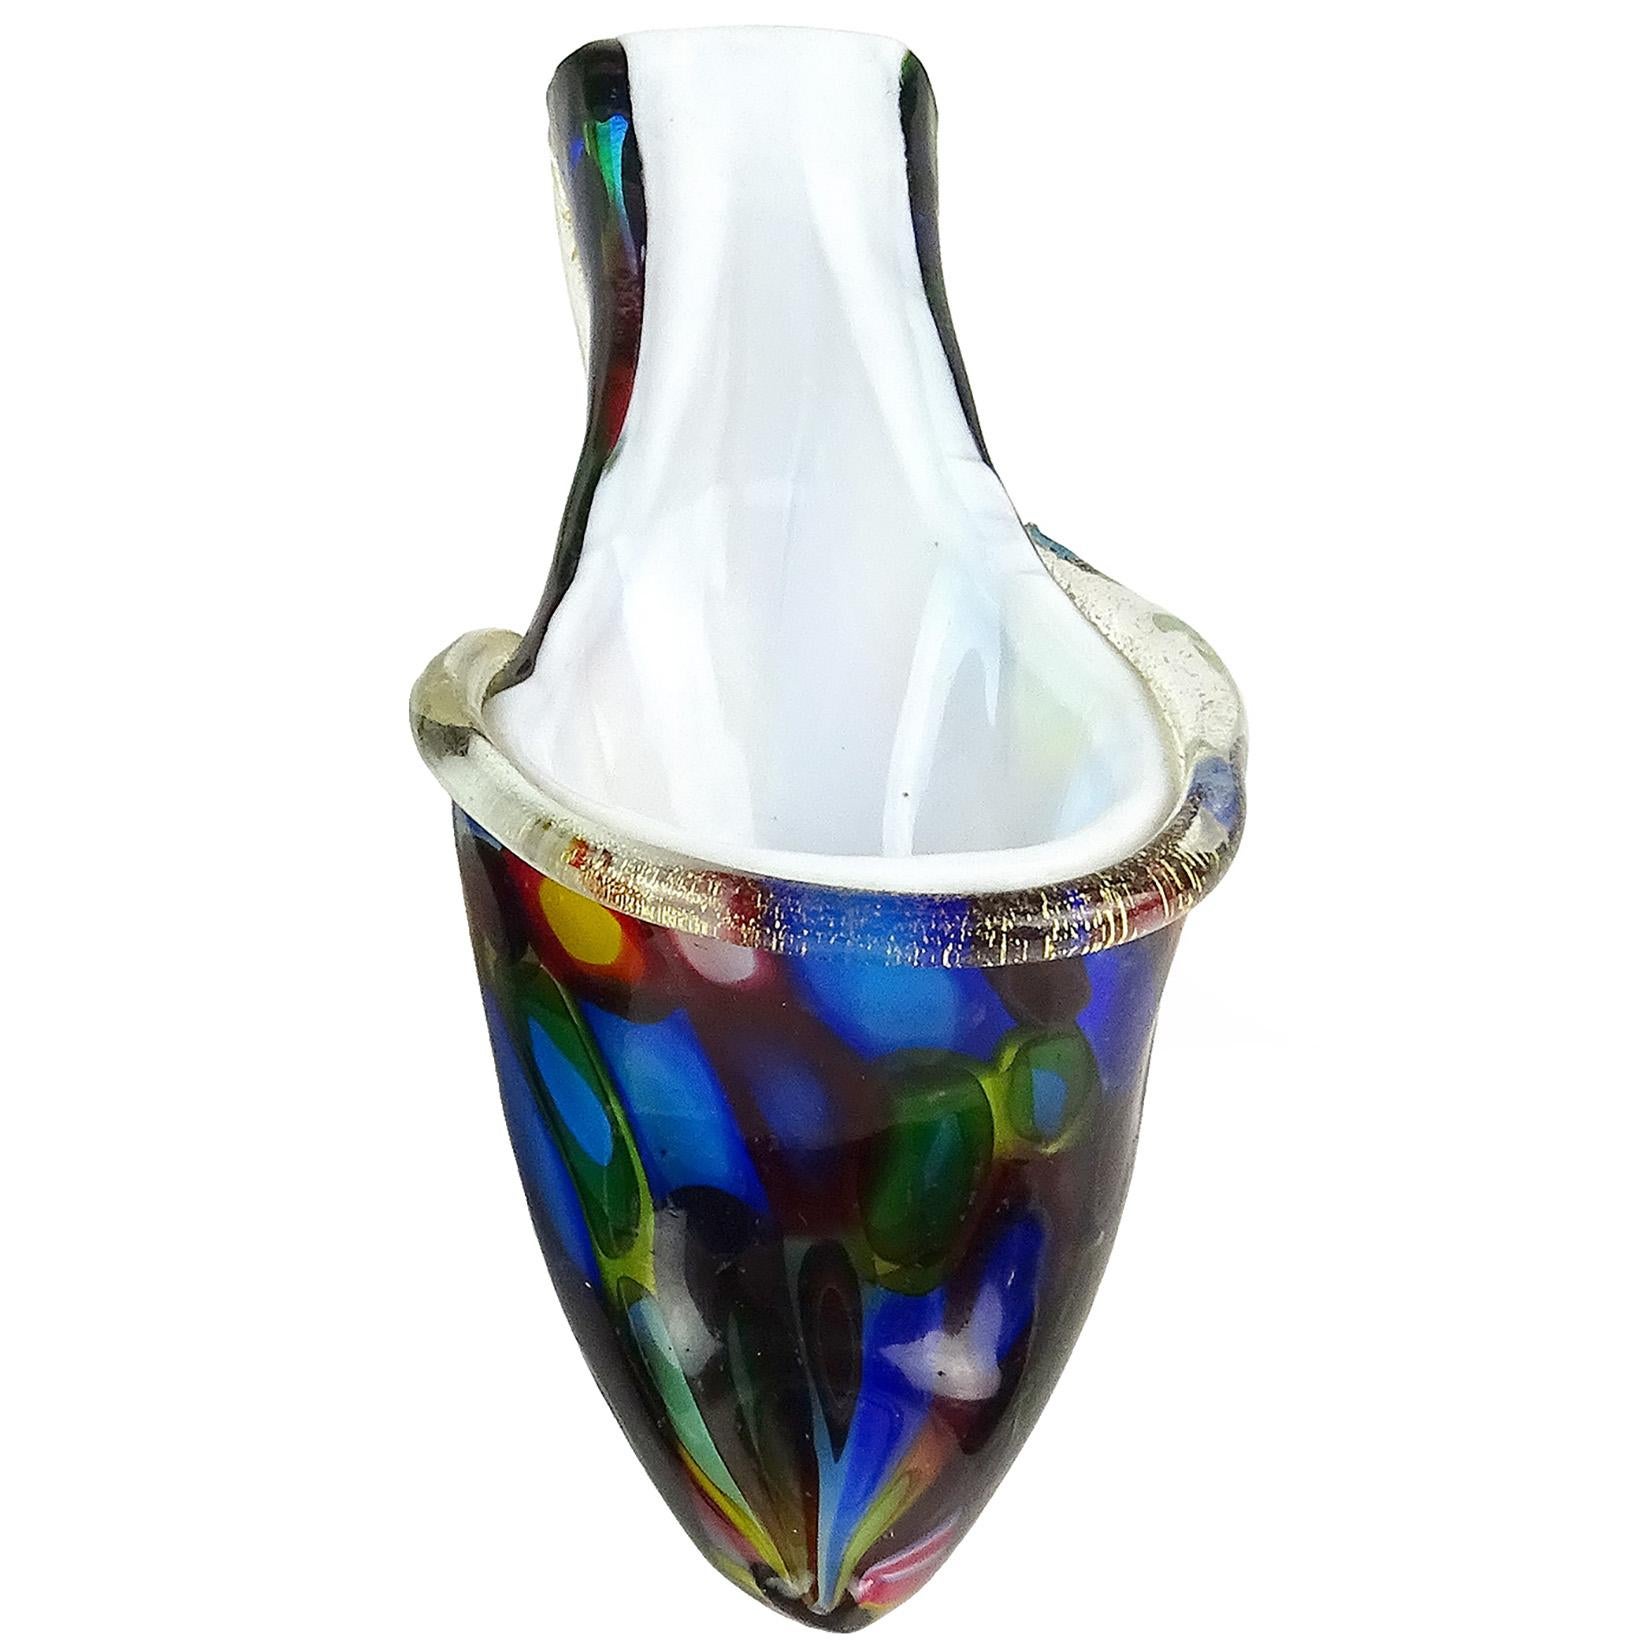 Beautiful Murano handblown multi-color murrine mosaic design Italian art glass kitten heel shoe sculpture. It has gold leaf on the heel and on the trim over the top. Made with a rainbow of colors, blue, green, yellow, orange, and red spots in a